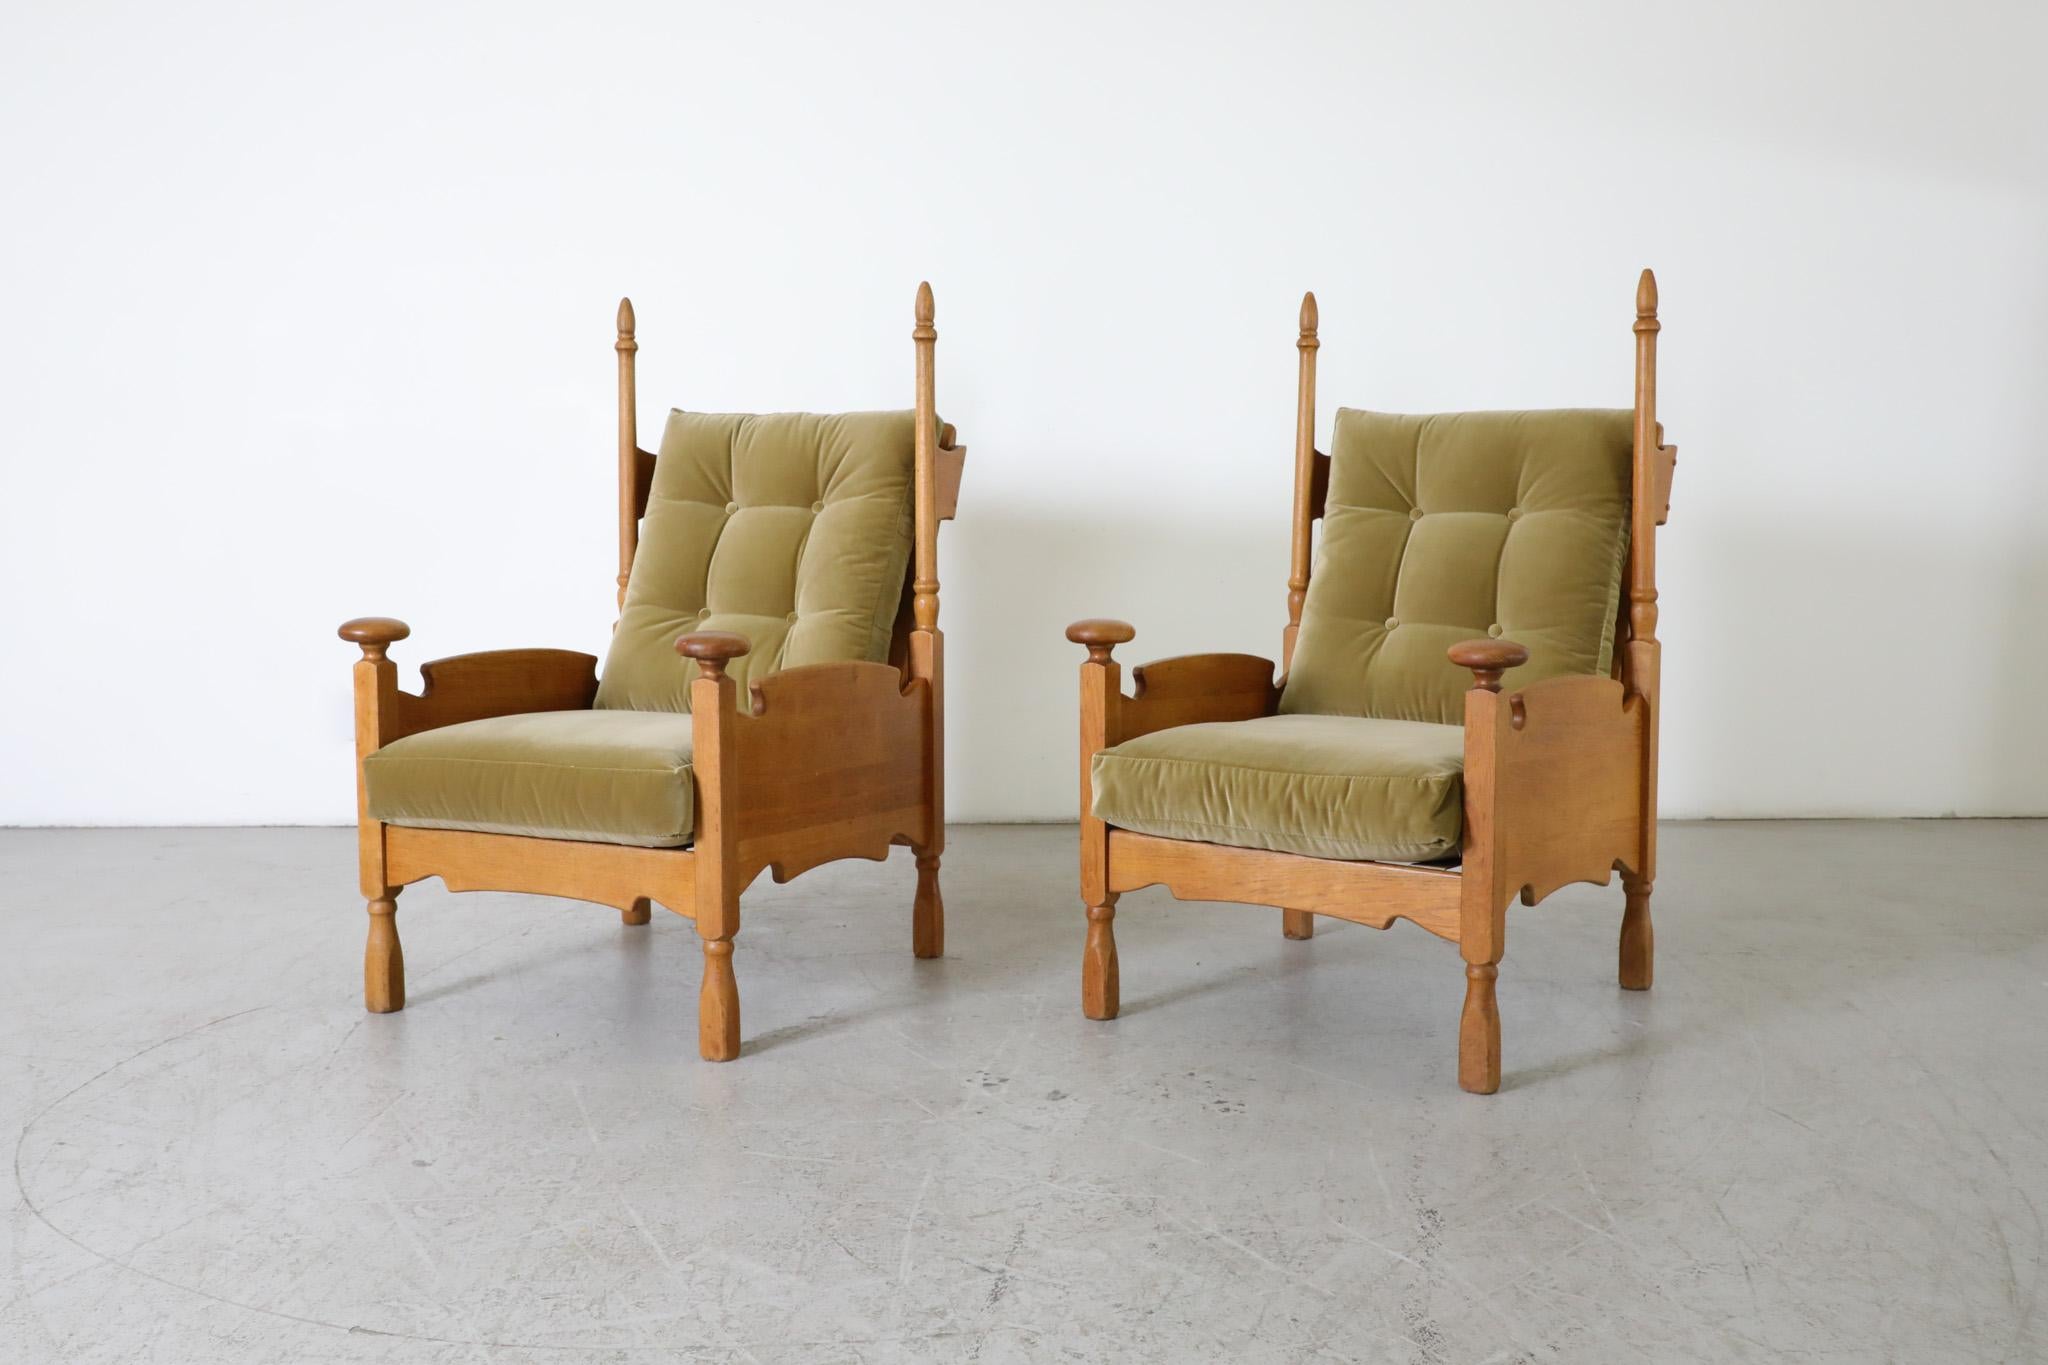 Rare and distinctively shaped oak lounge chairs, adorned with large rounded finials at the front and high horn-shaped rods at the back. Very little information is available about these chairs but they are both visually appealing and extremely